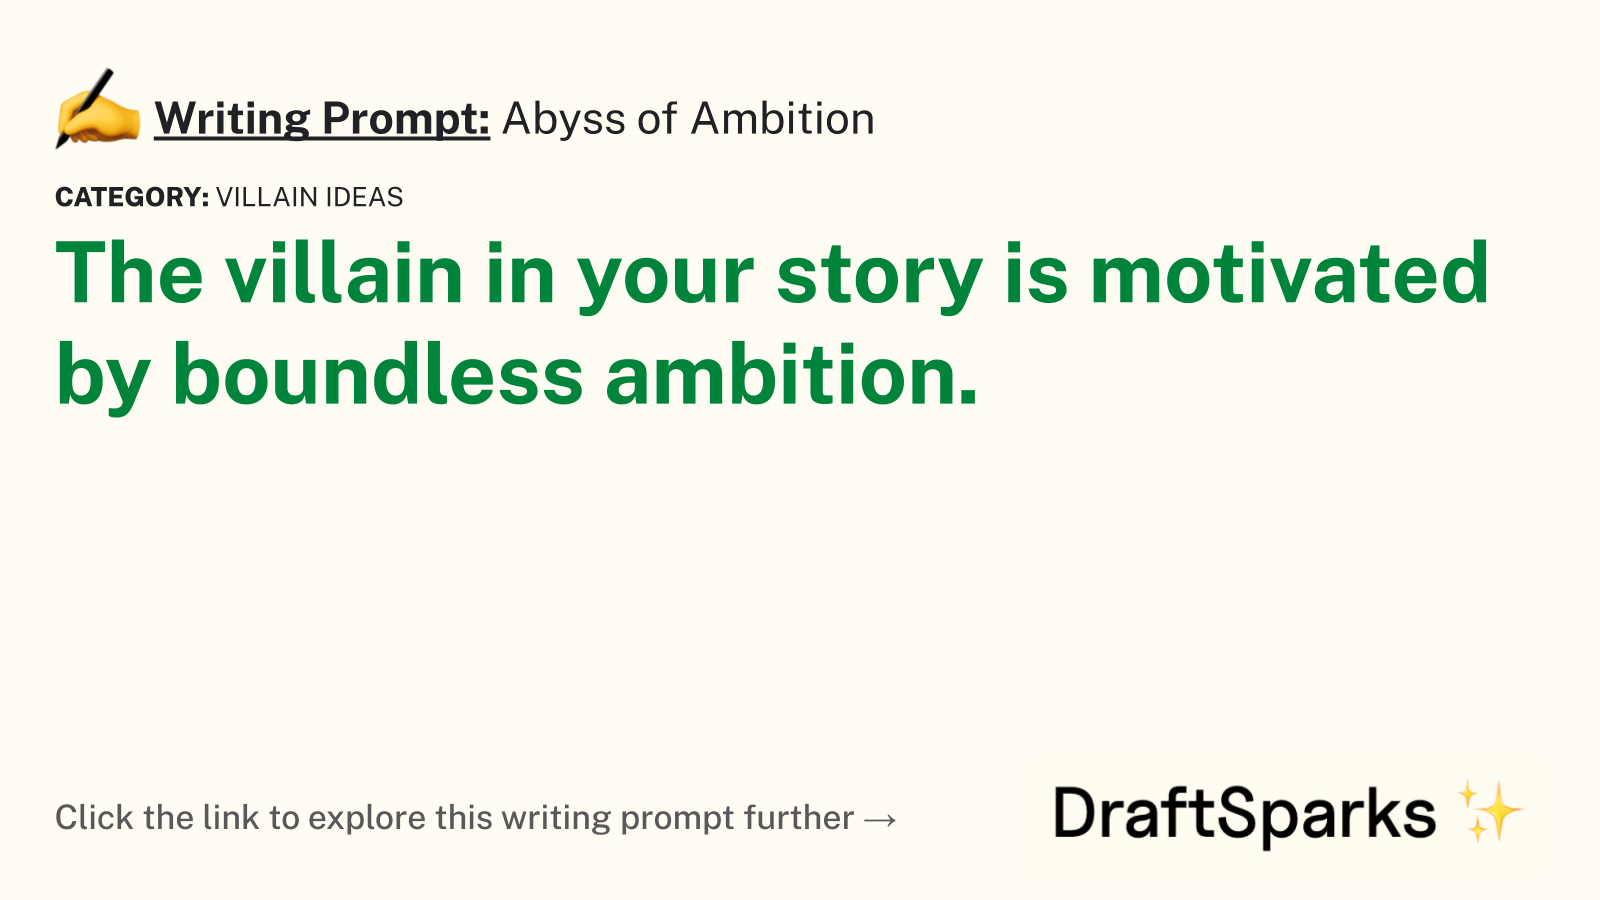 Abyss of Ambition